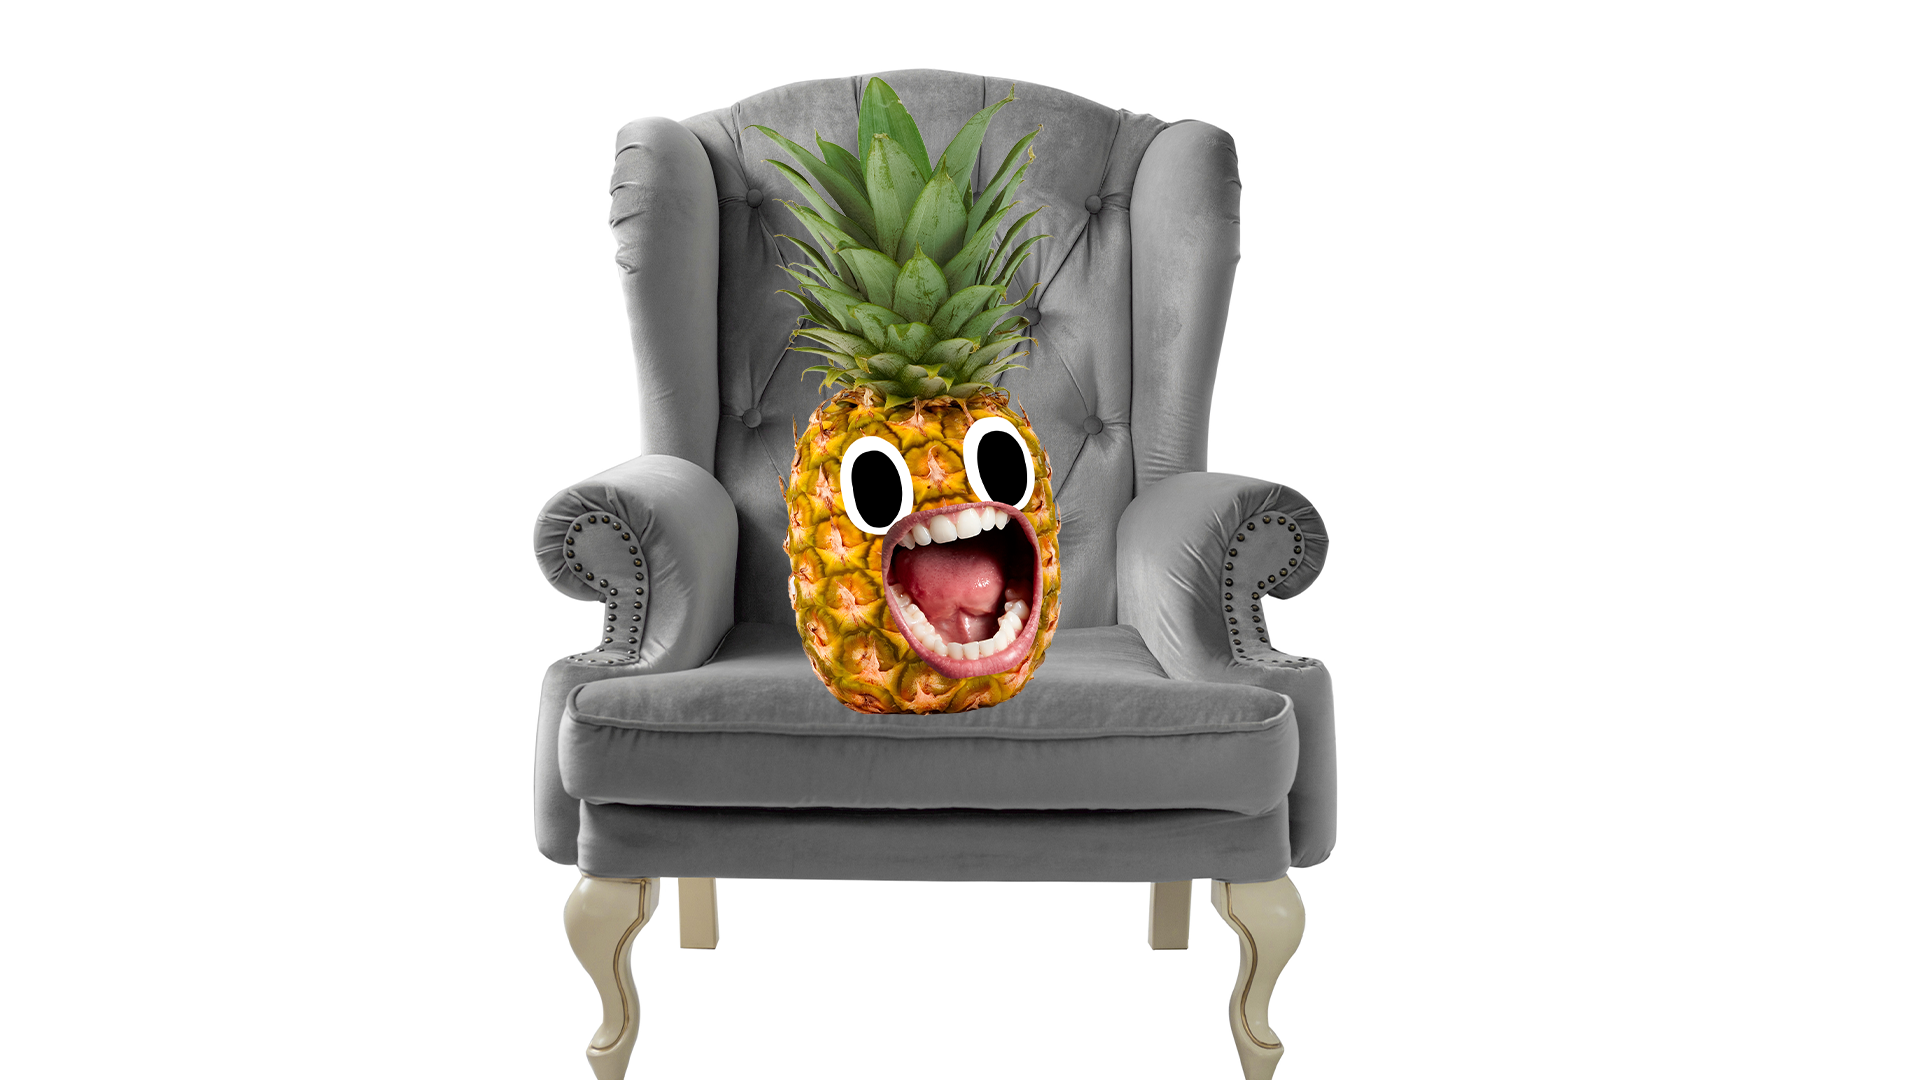 Pinapple sitting in silver chair on white background